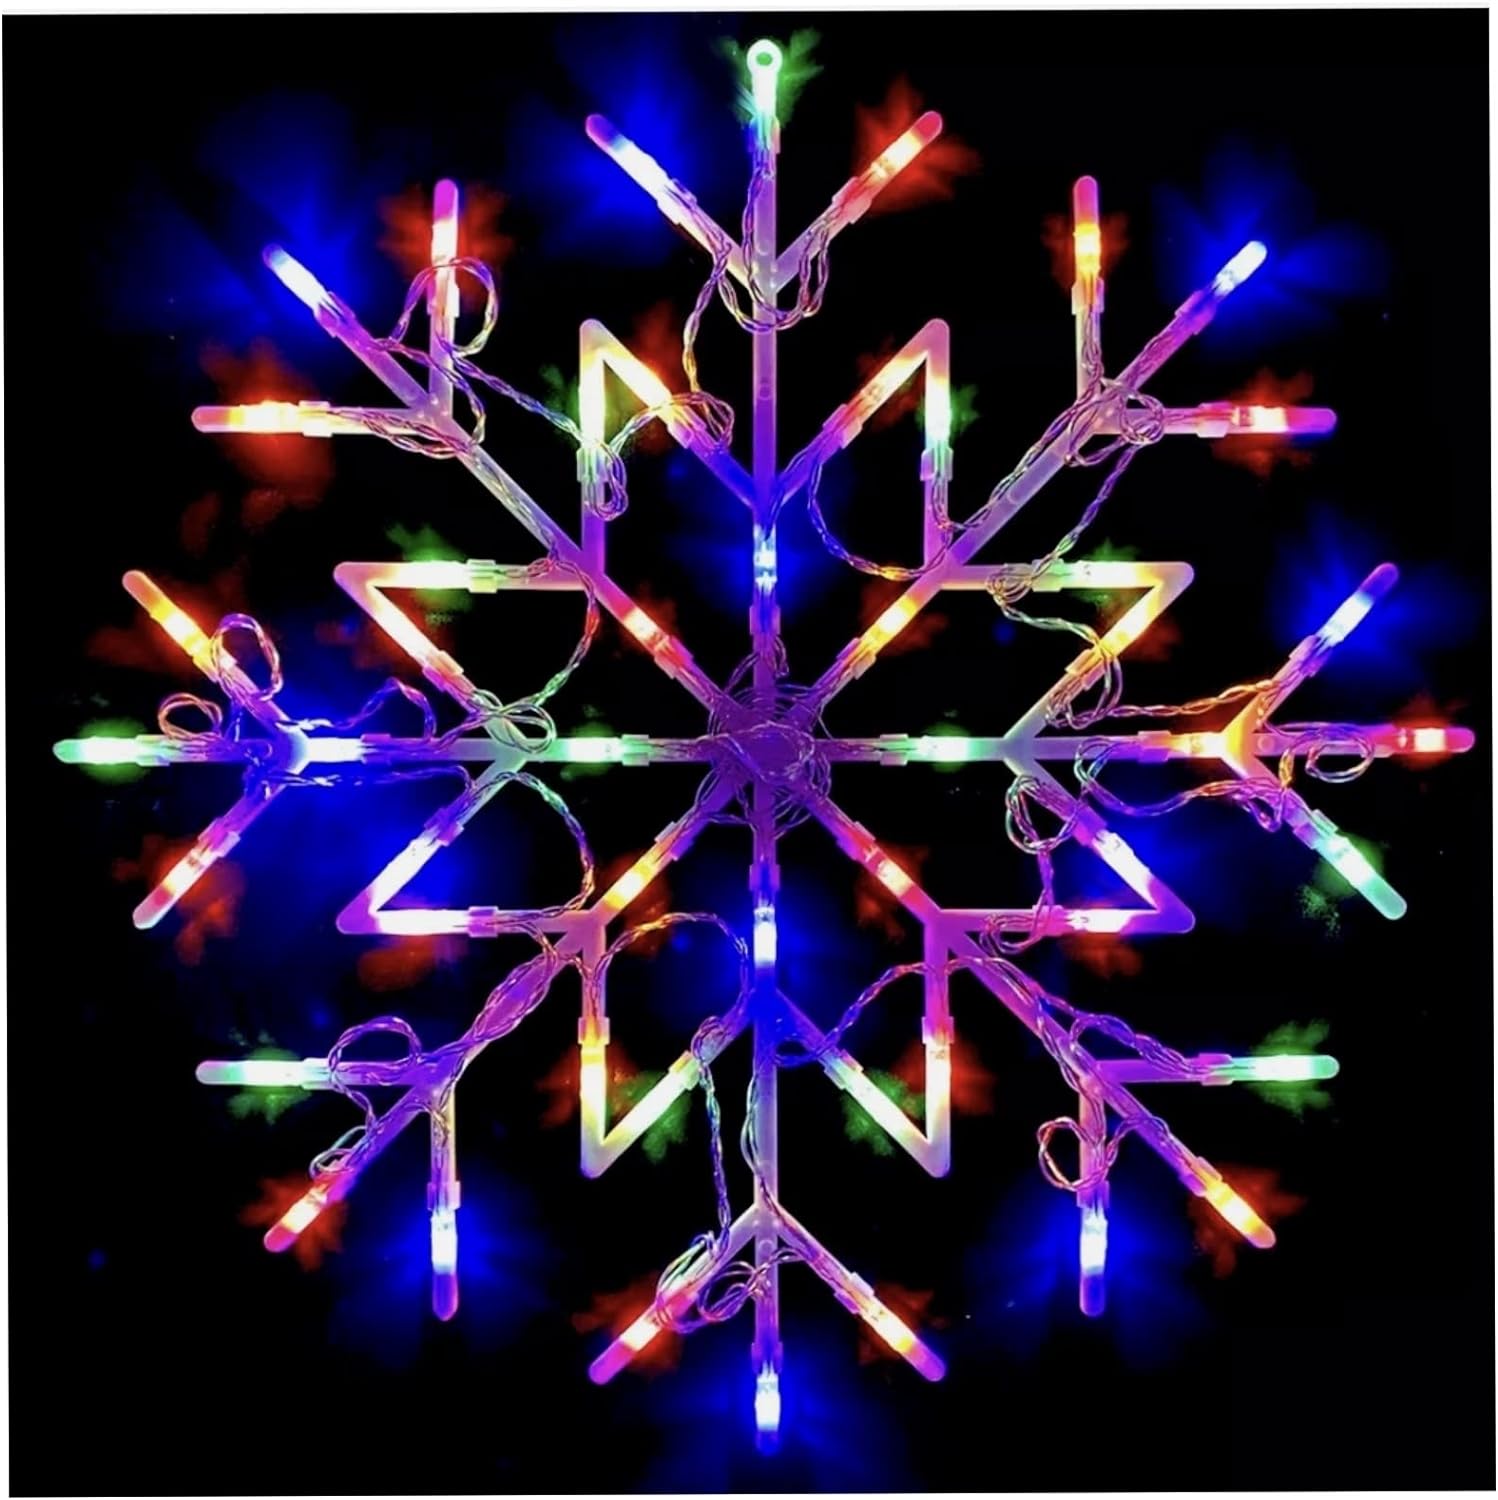 ADEPTNA 50 LED Snowflake Christmas Light - Flashing Silhouette Home Window Xmas Festive Party Decoration Lights Home Office Indoor (Multi-Colour)